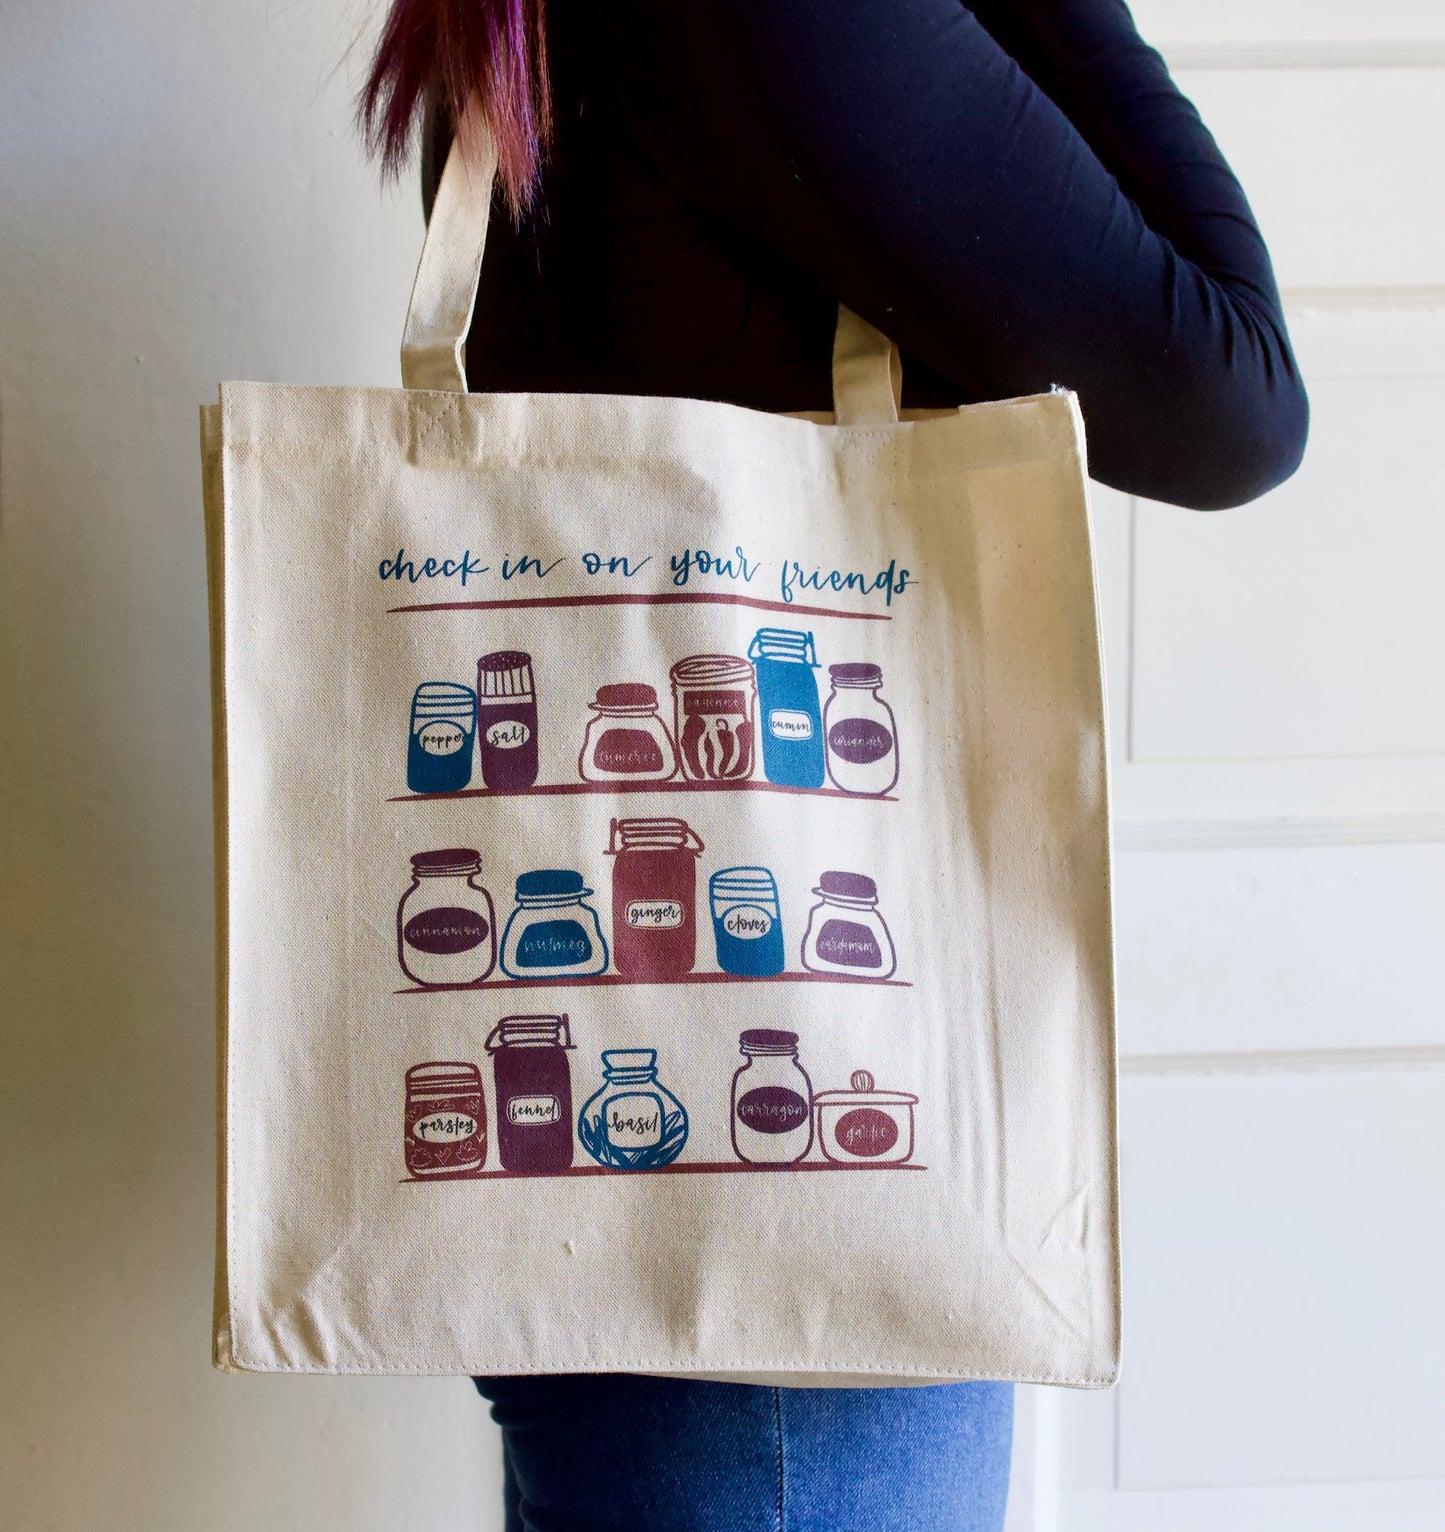 Woman wearing tote that says "Check in on your friends" with cute kitchen design